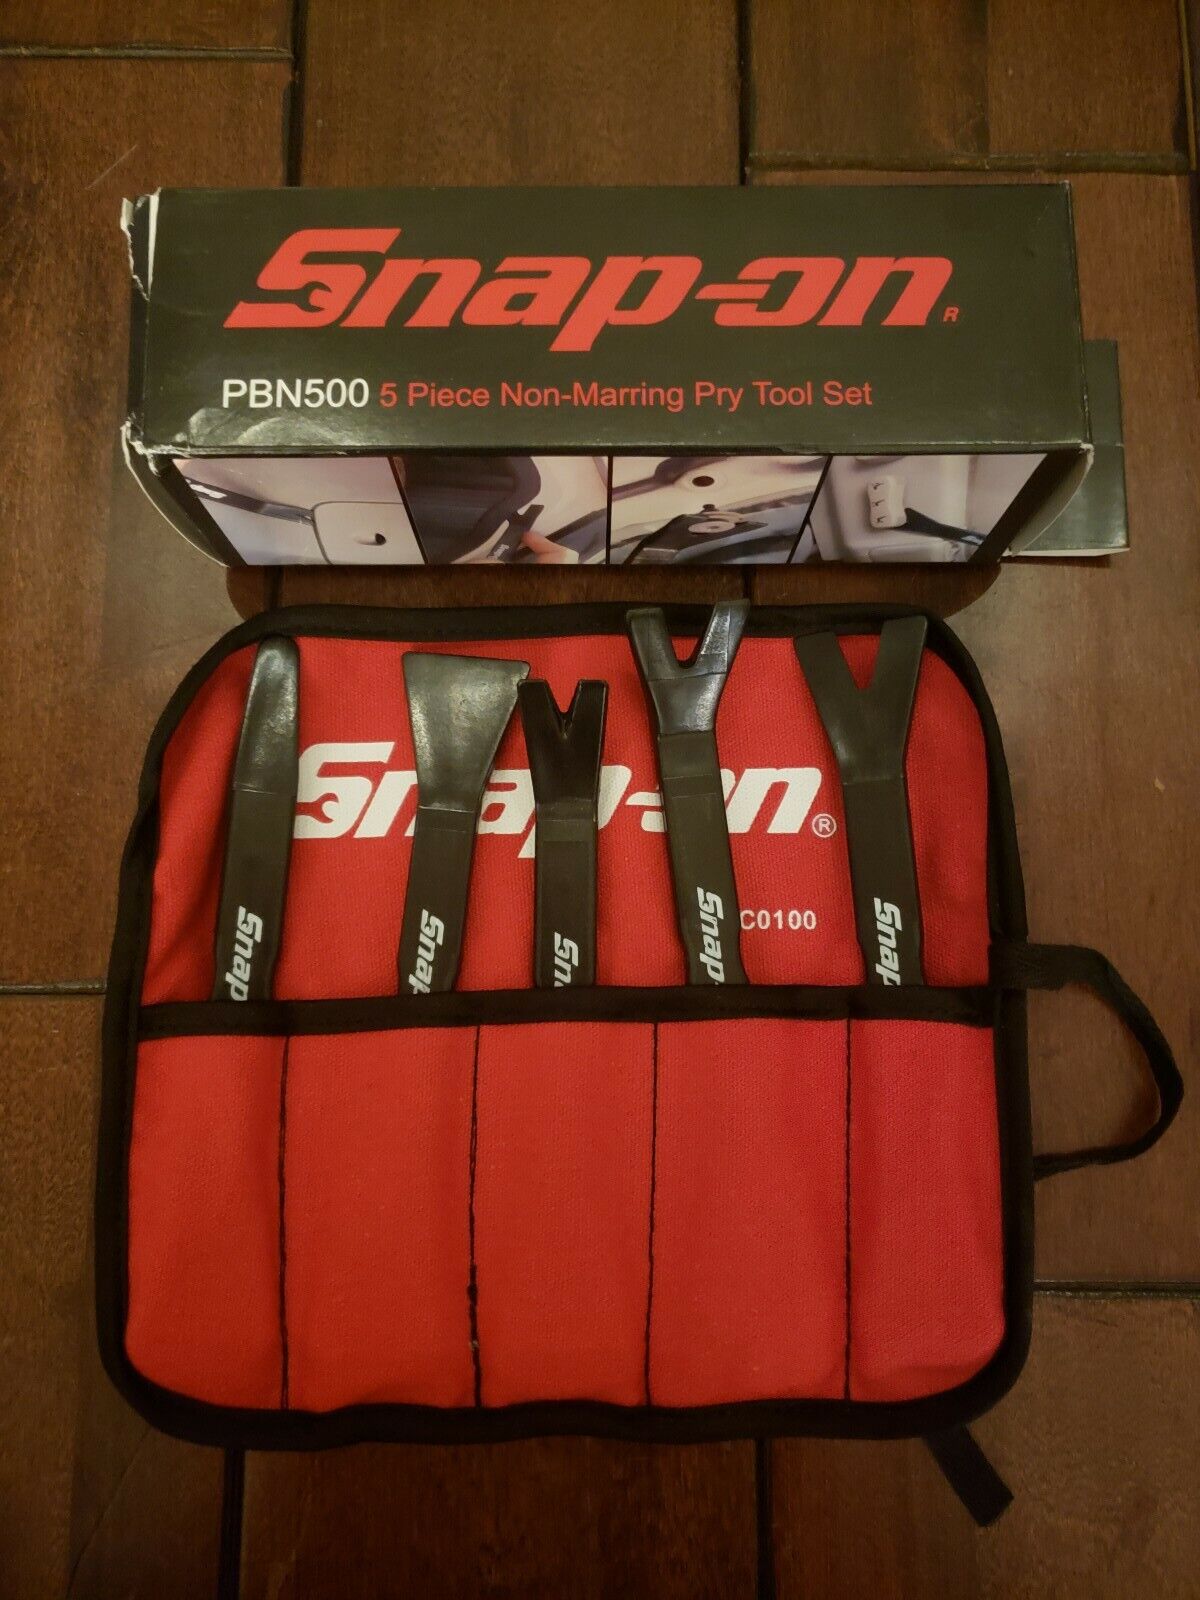 *NEW* Snap On PBN500 5 Pc Non Marring Pry Tool Set - 